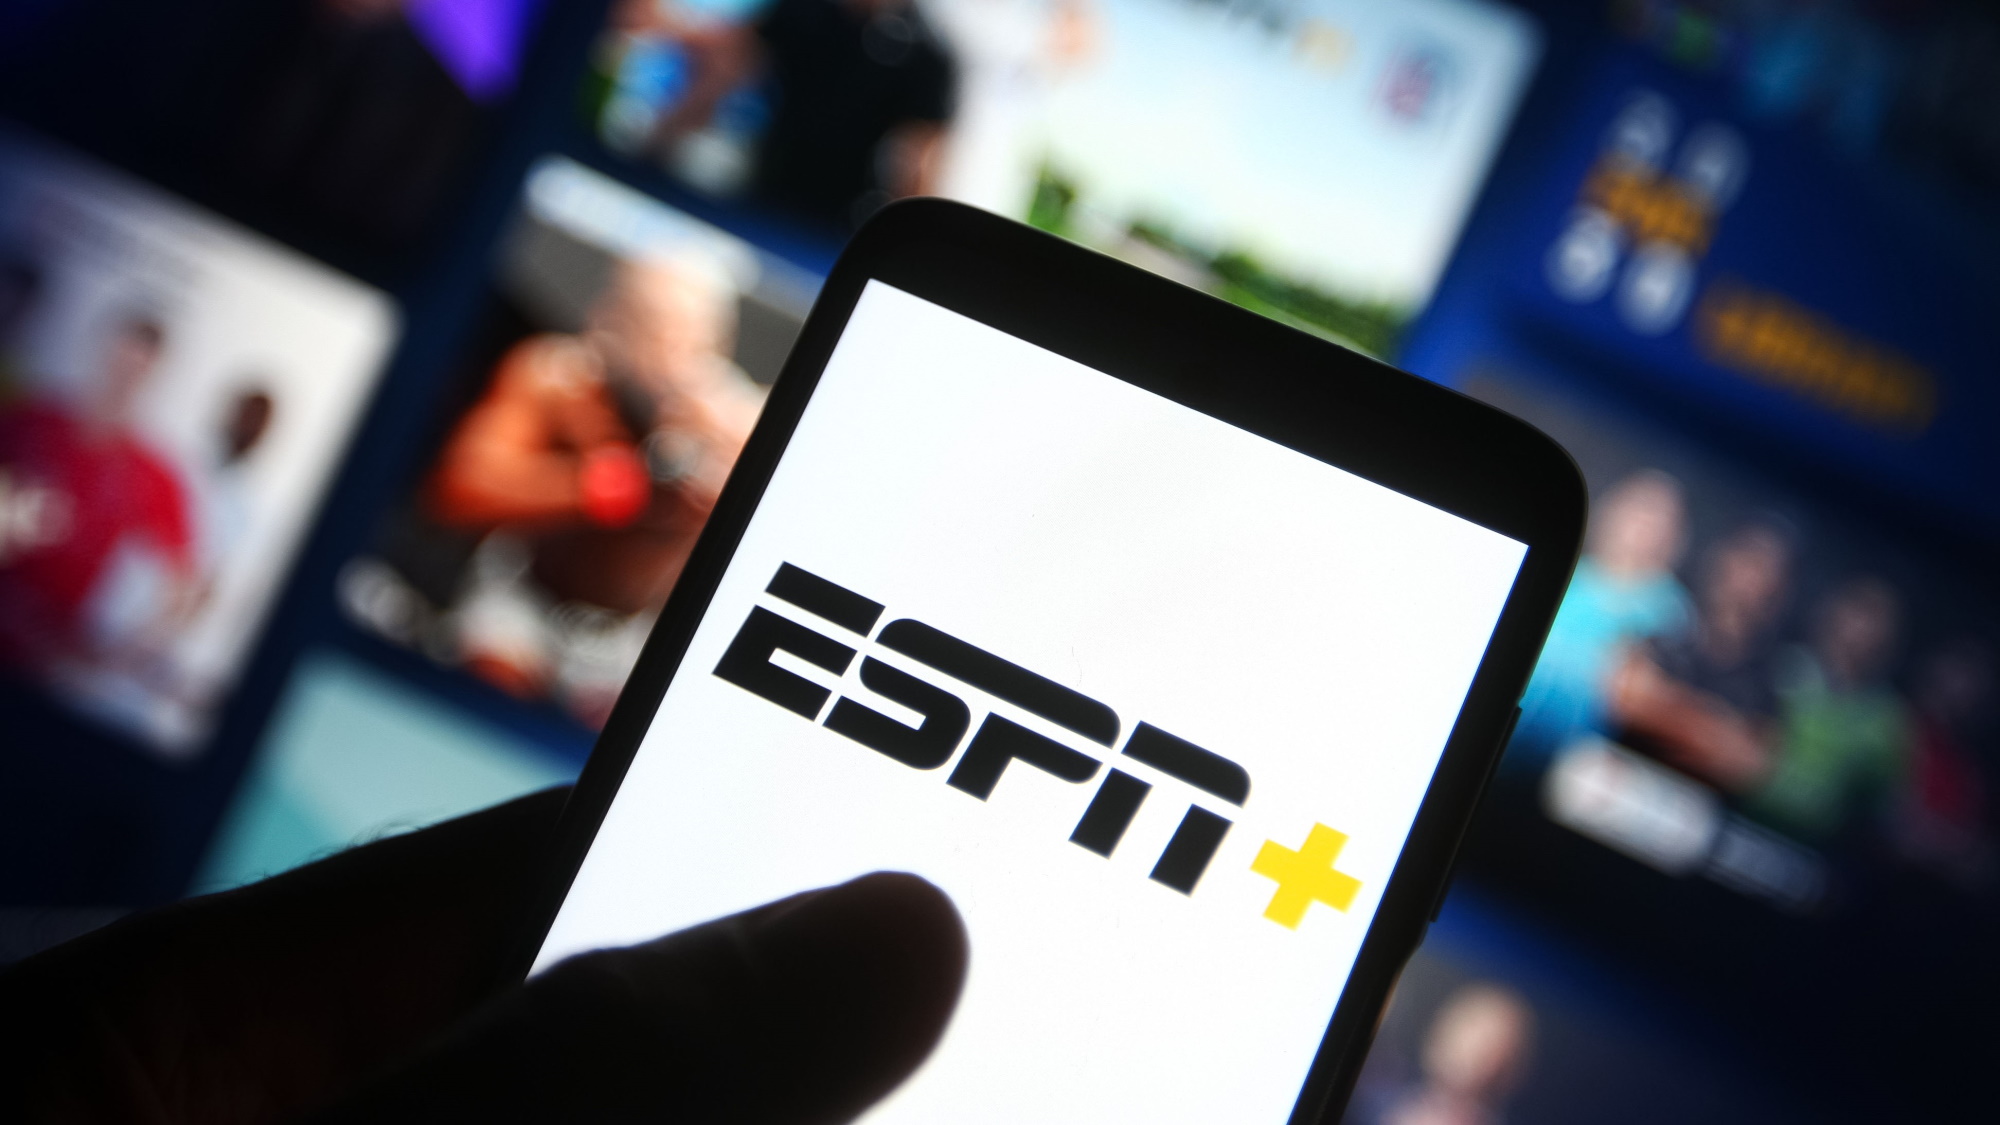 ESPN Plus cost subscriptions, bundles and deals available in 2023 TechRadar